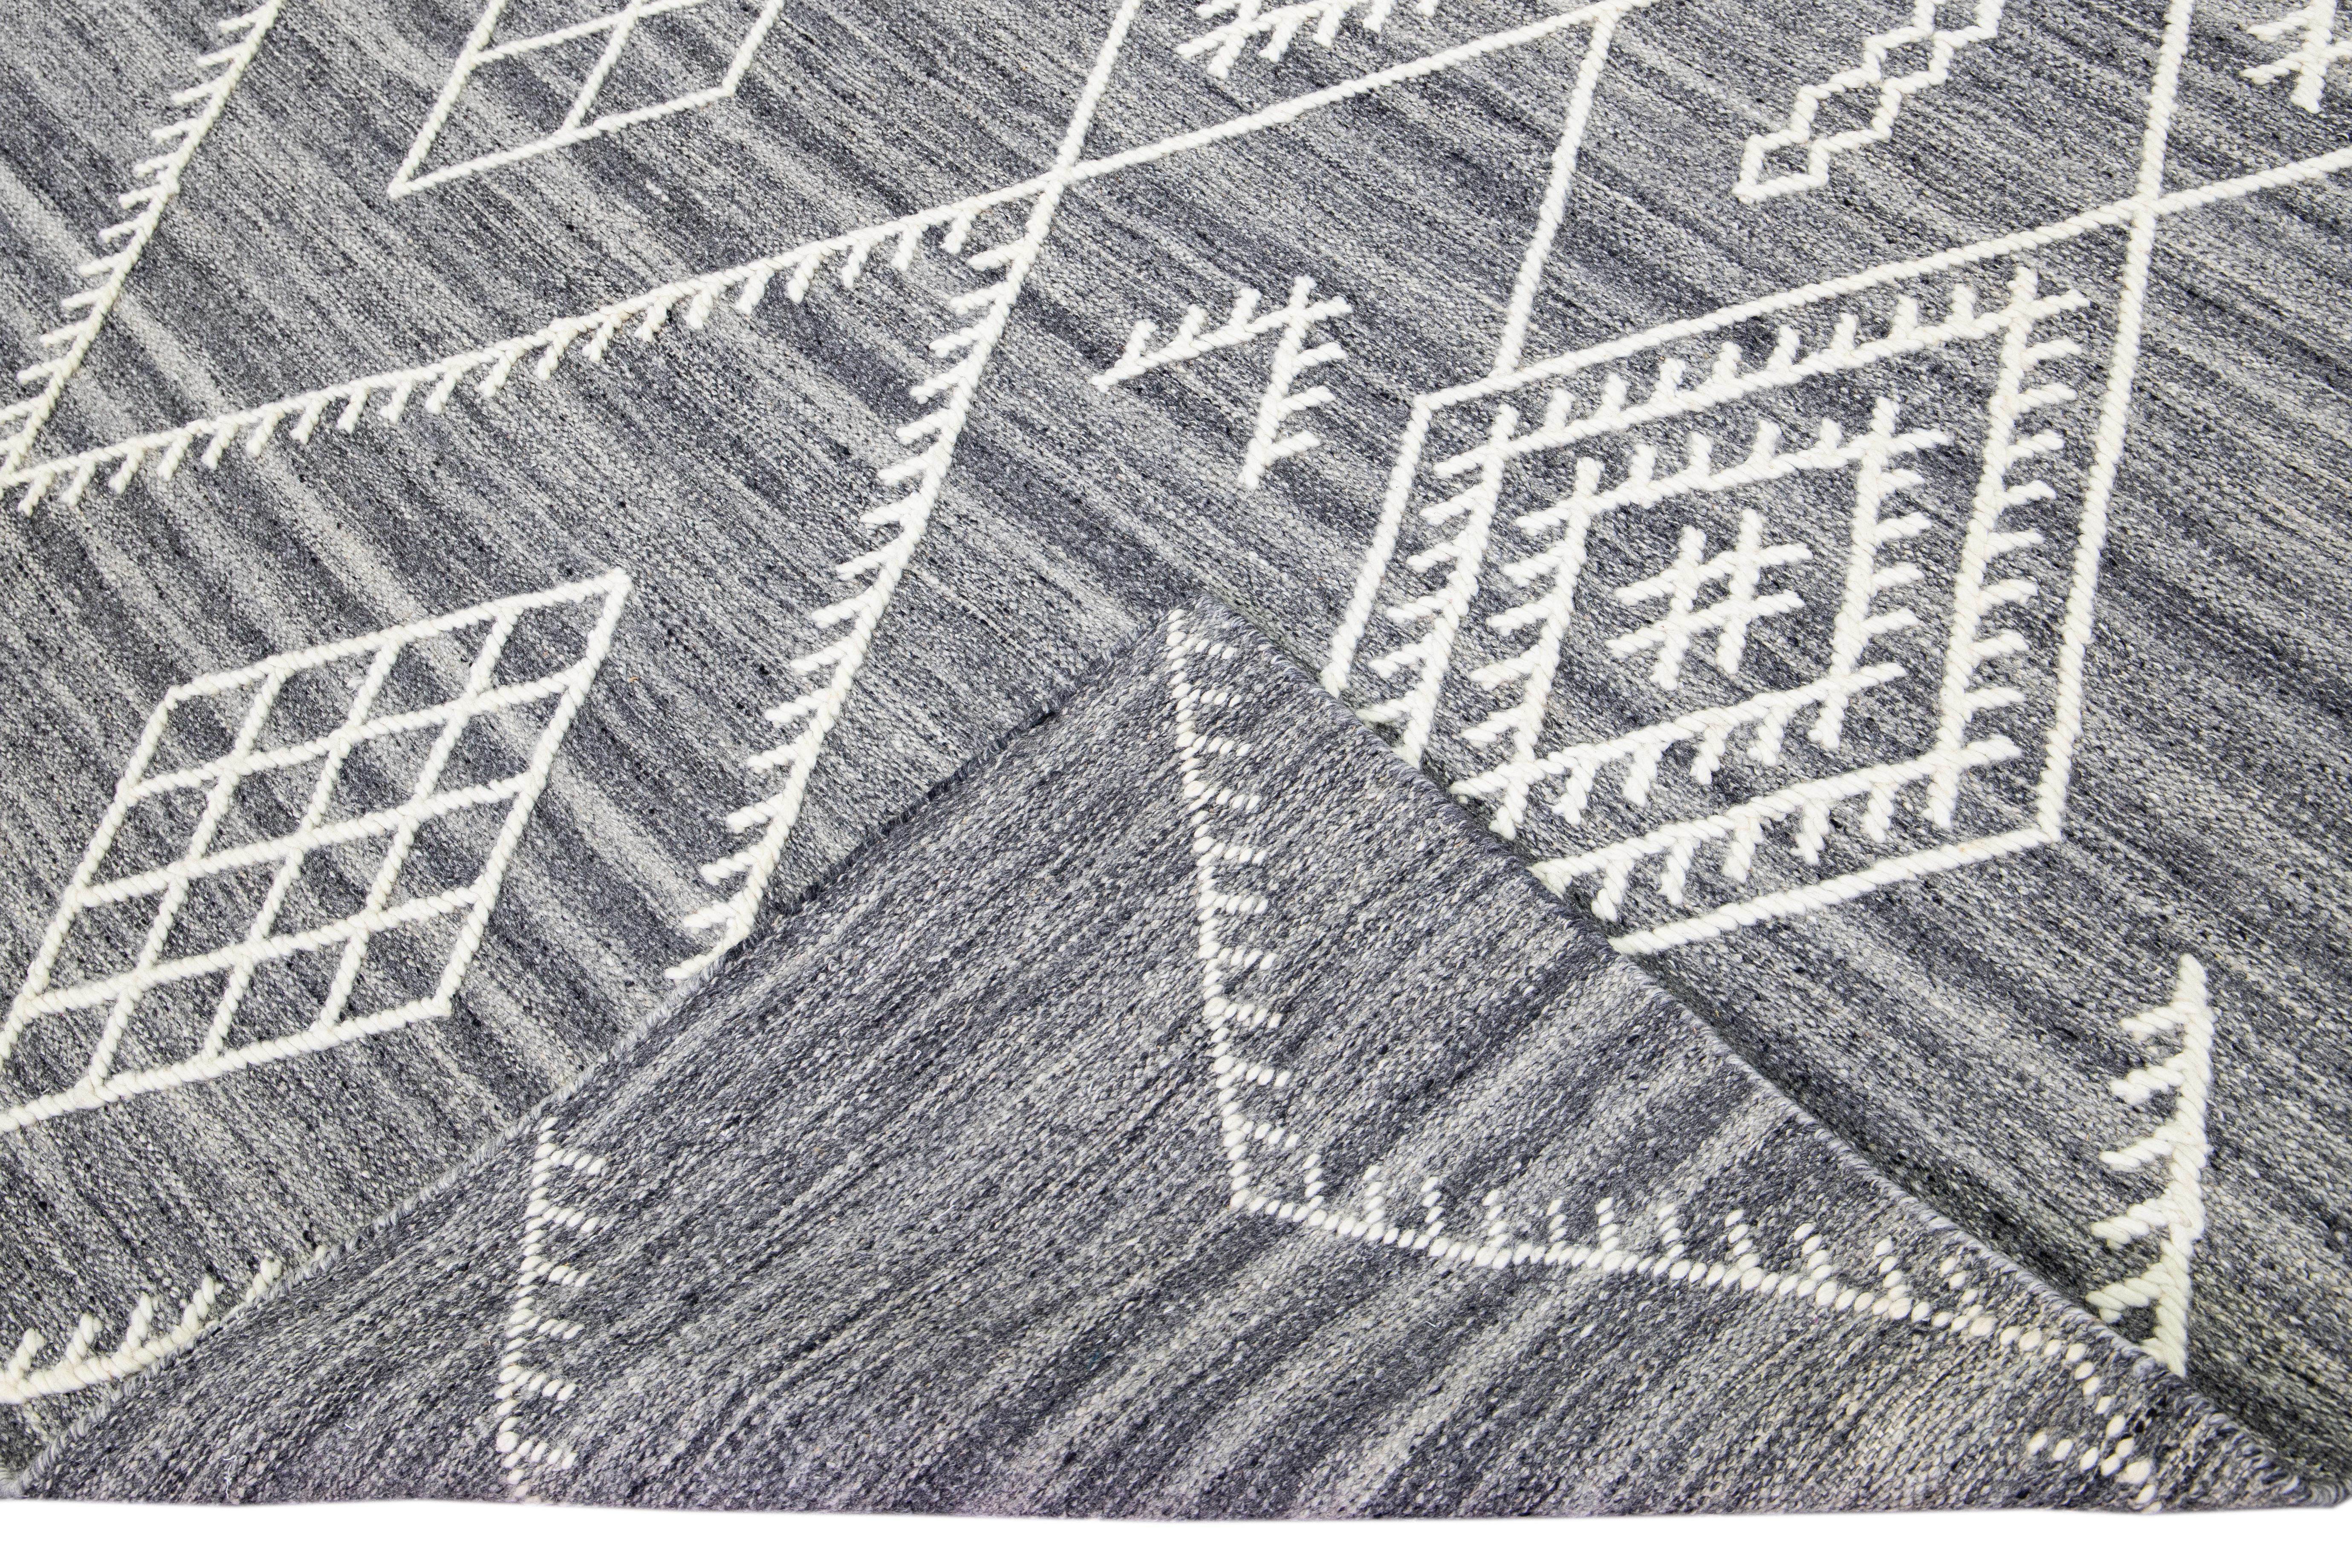 Beautiful kilim handmade wool rug with a gray field. This custom modern flatweave rug part of our Nantucket collection has ivory accents and features a gorgeous all-over geometric coastal design.

This rug measures: 9' x 12'.

Our rugs are